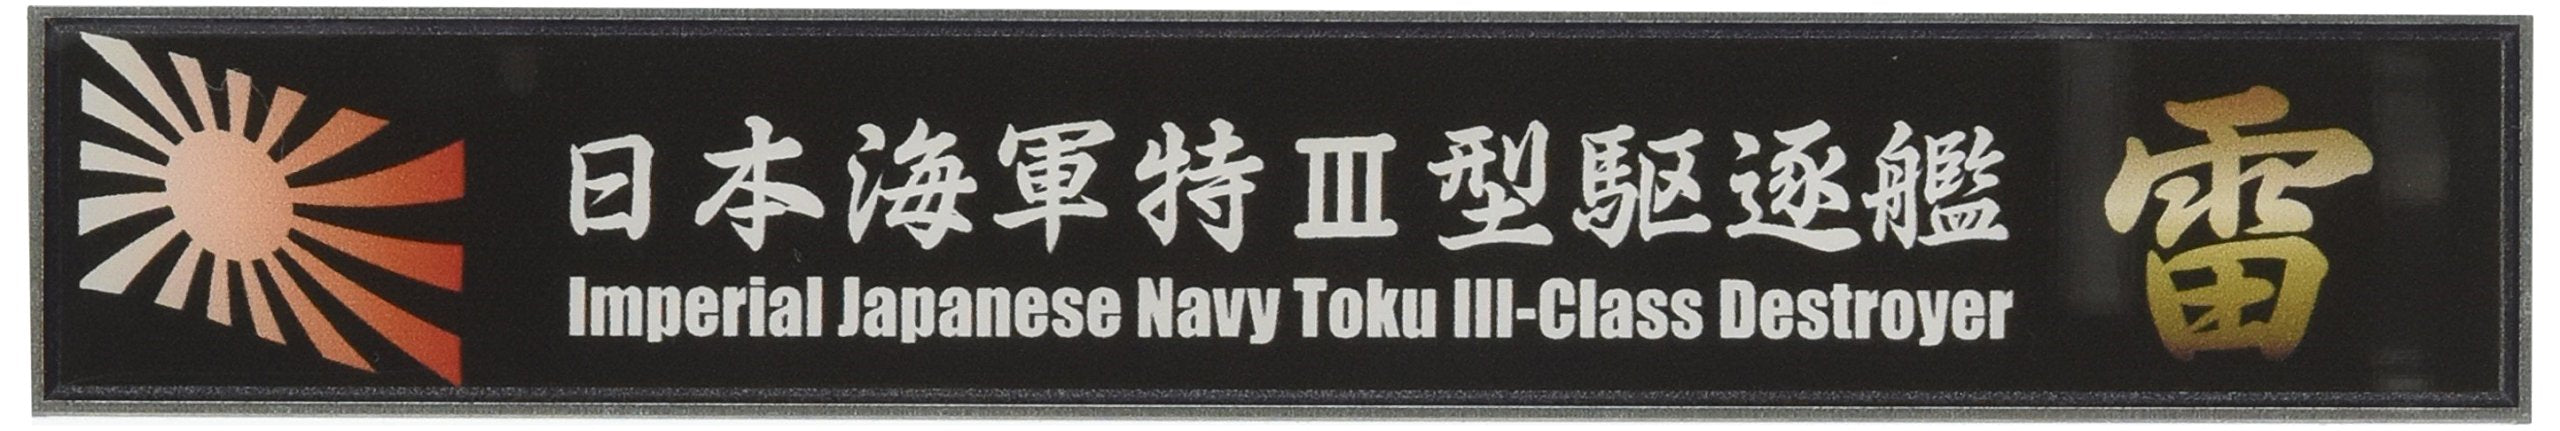 Fujimi Model Ship Name Plate Series No.103 Japanese Navy Special Type Iii Destroyer Thunder Plastic Model Parts